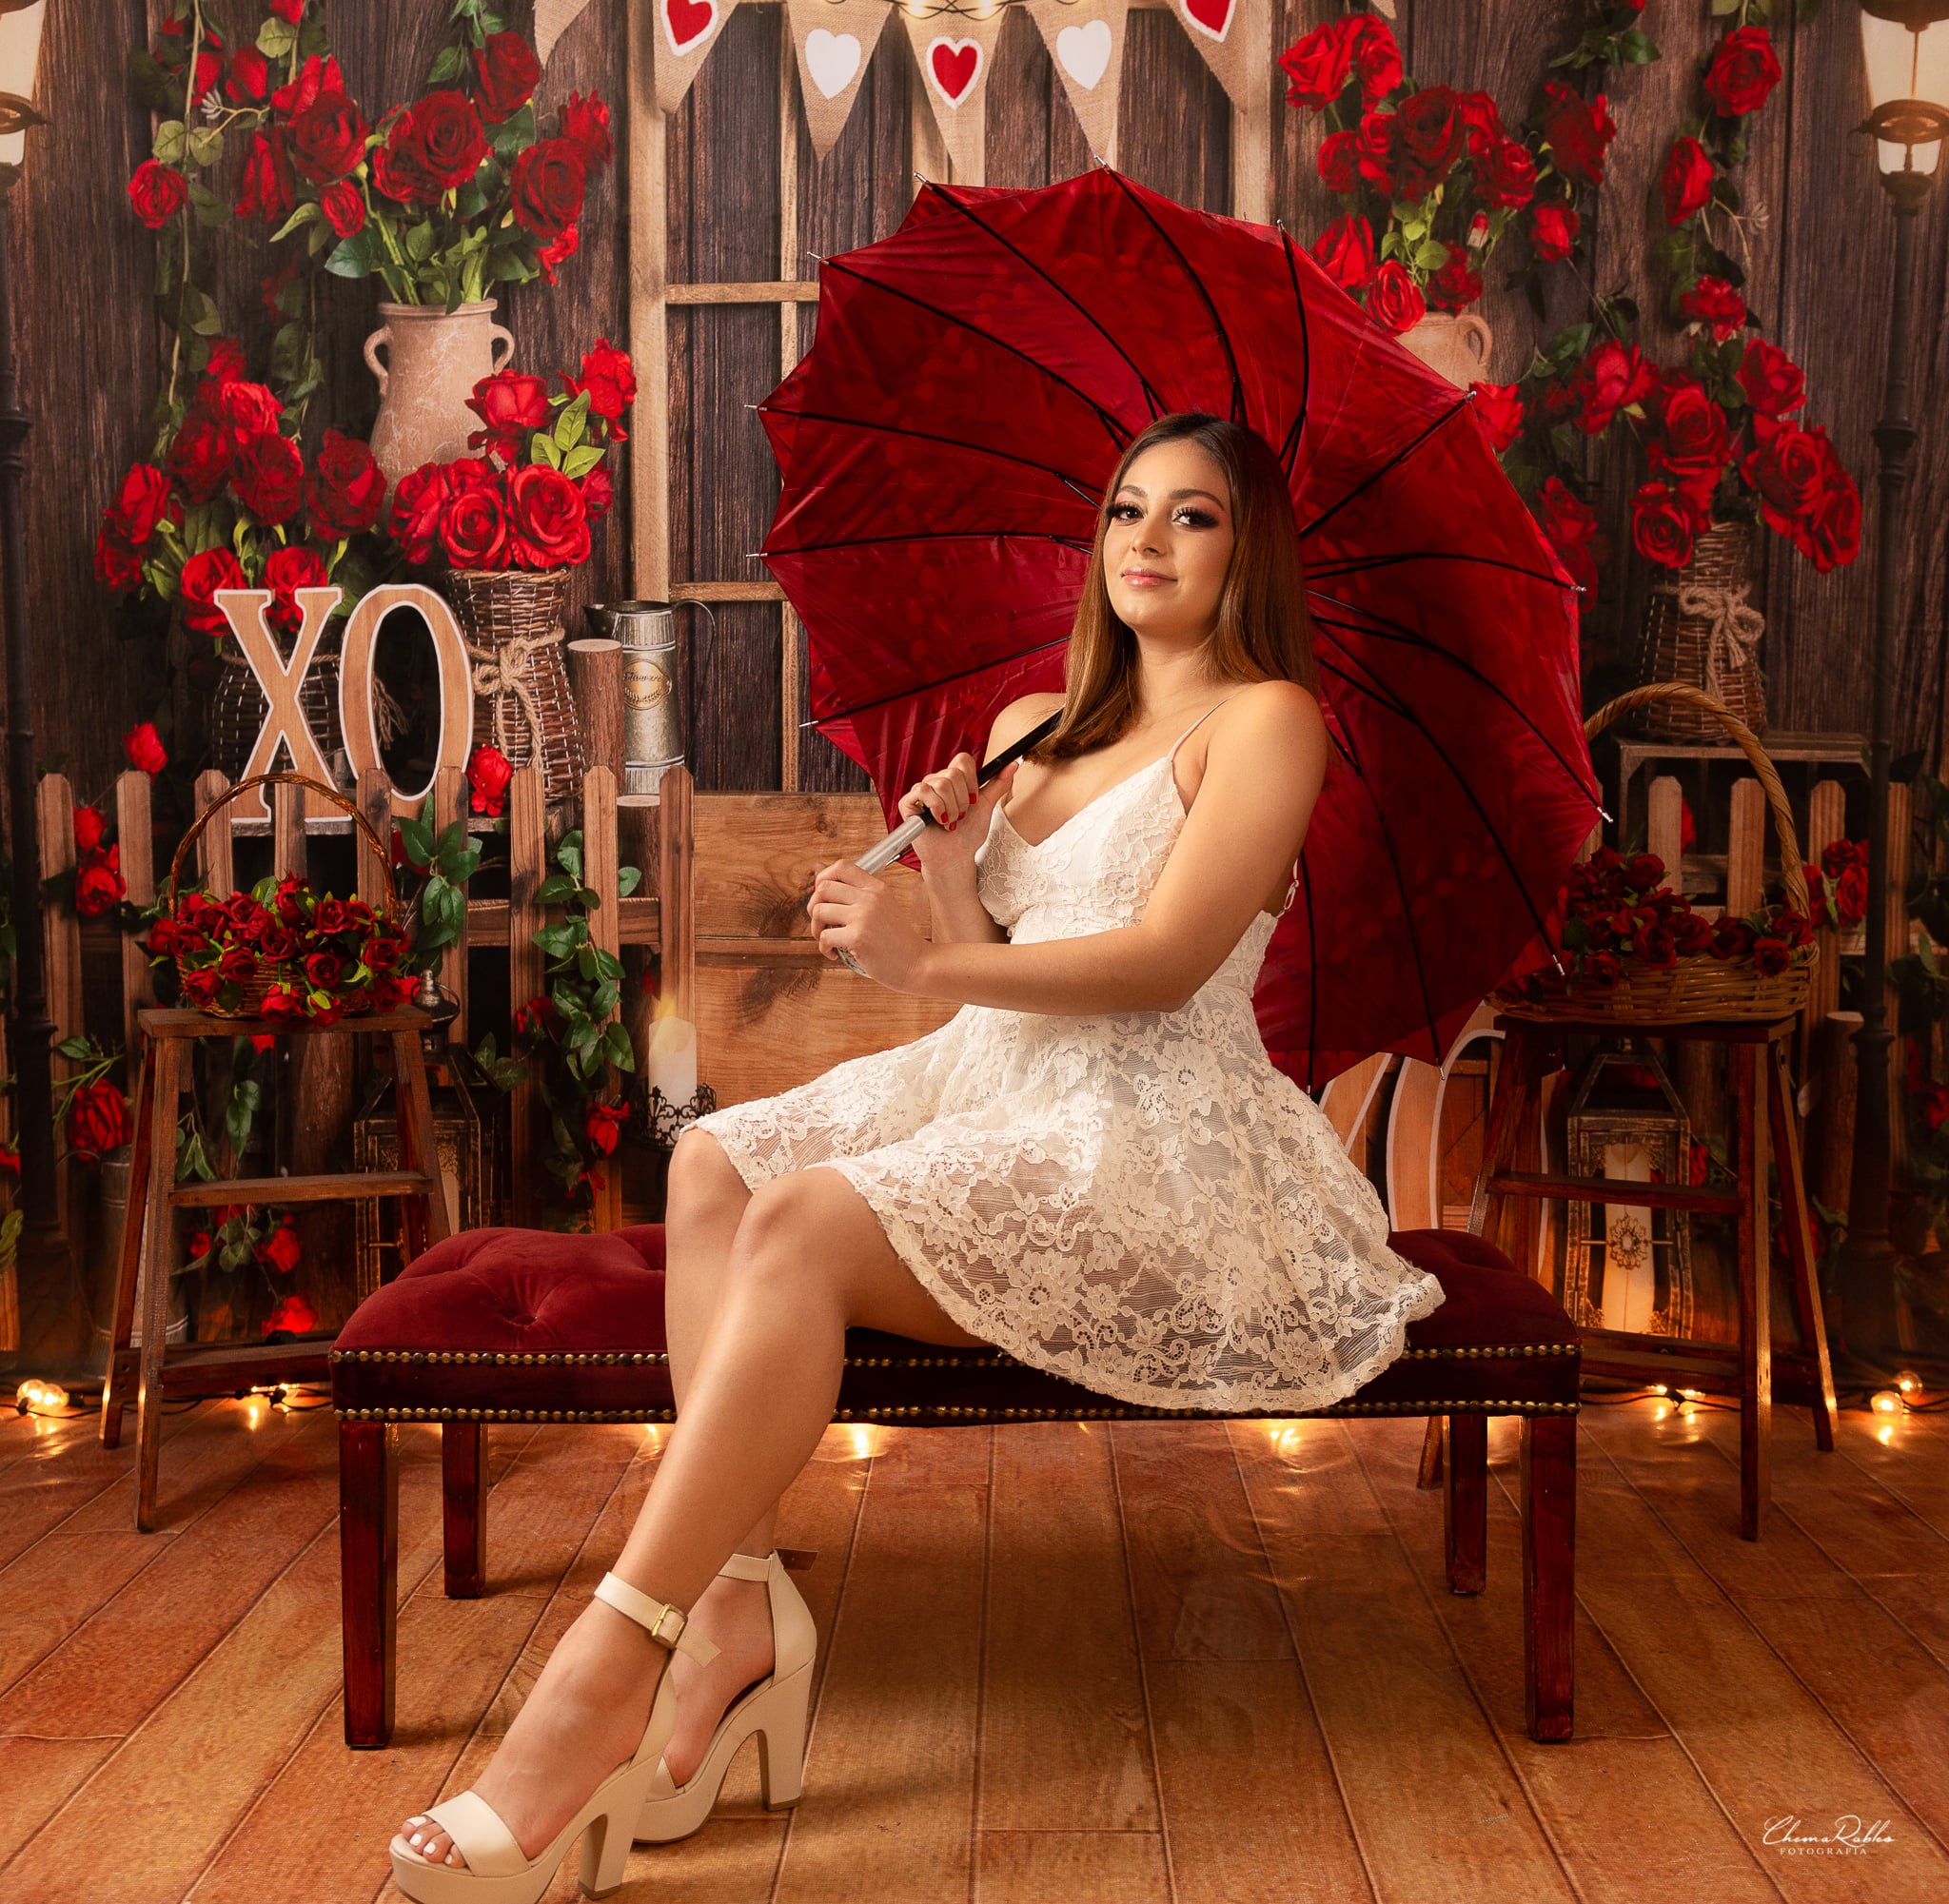 Kate Valentine's day Backdrop Rose Manor Board Designed by Emetselch